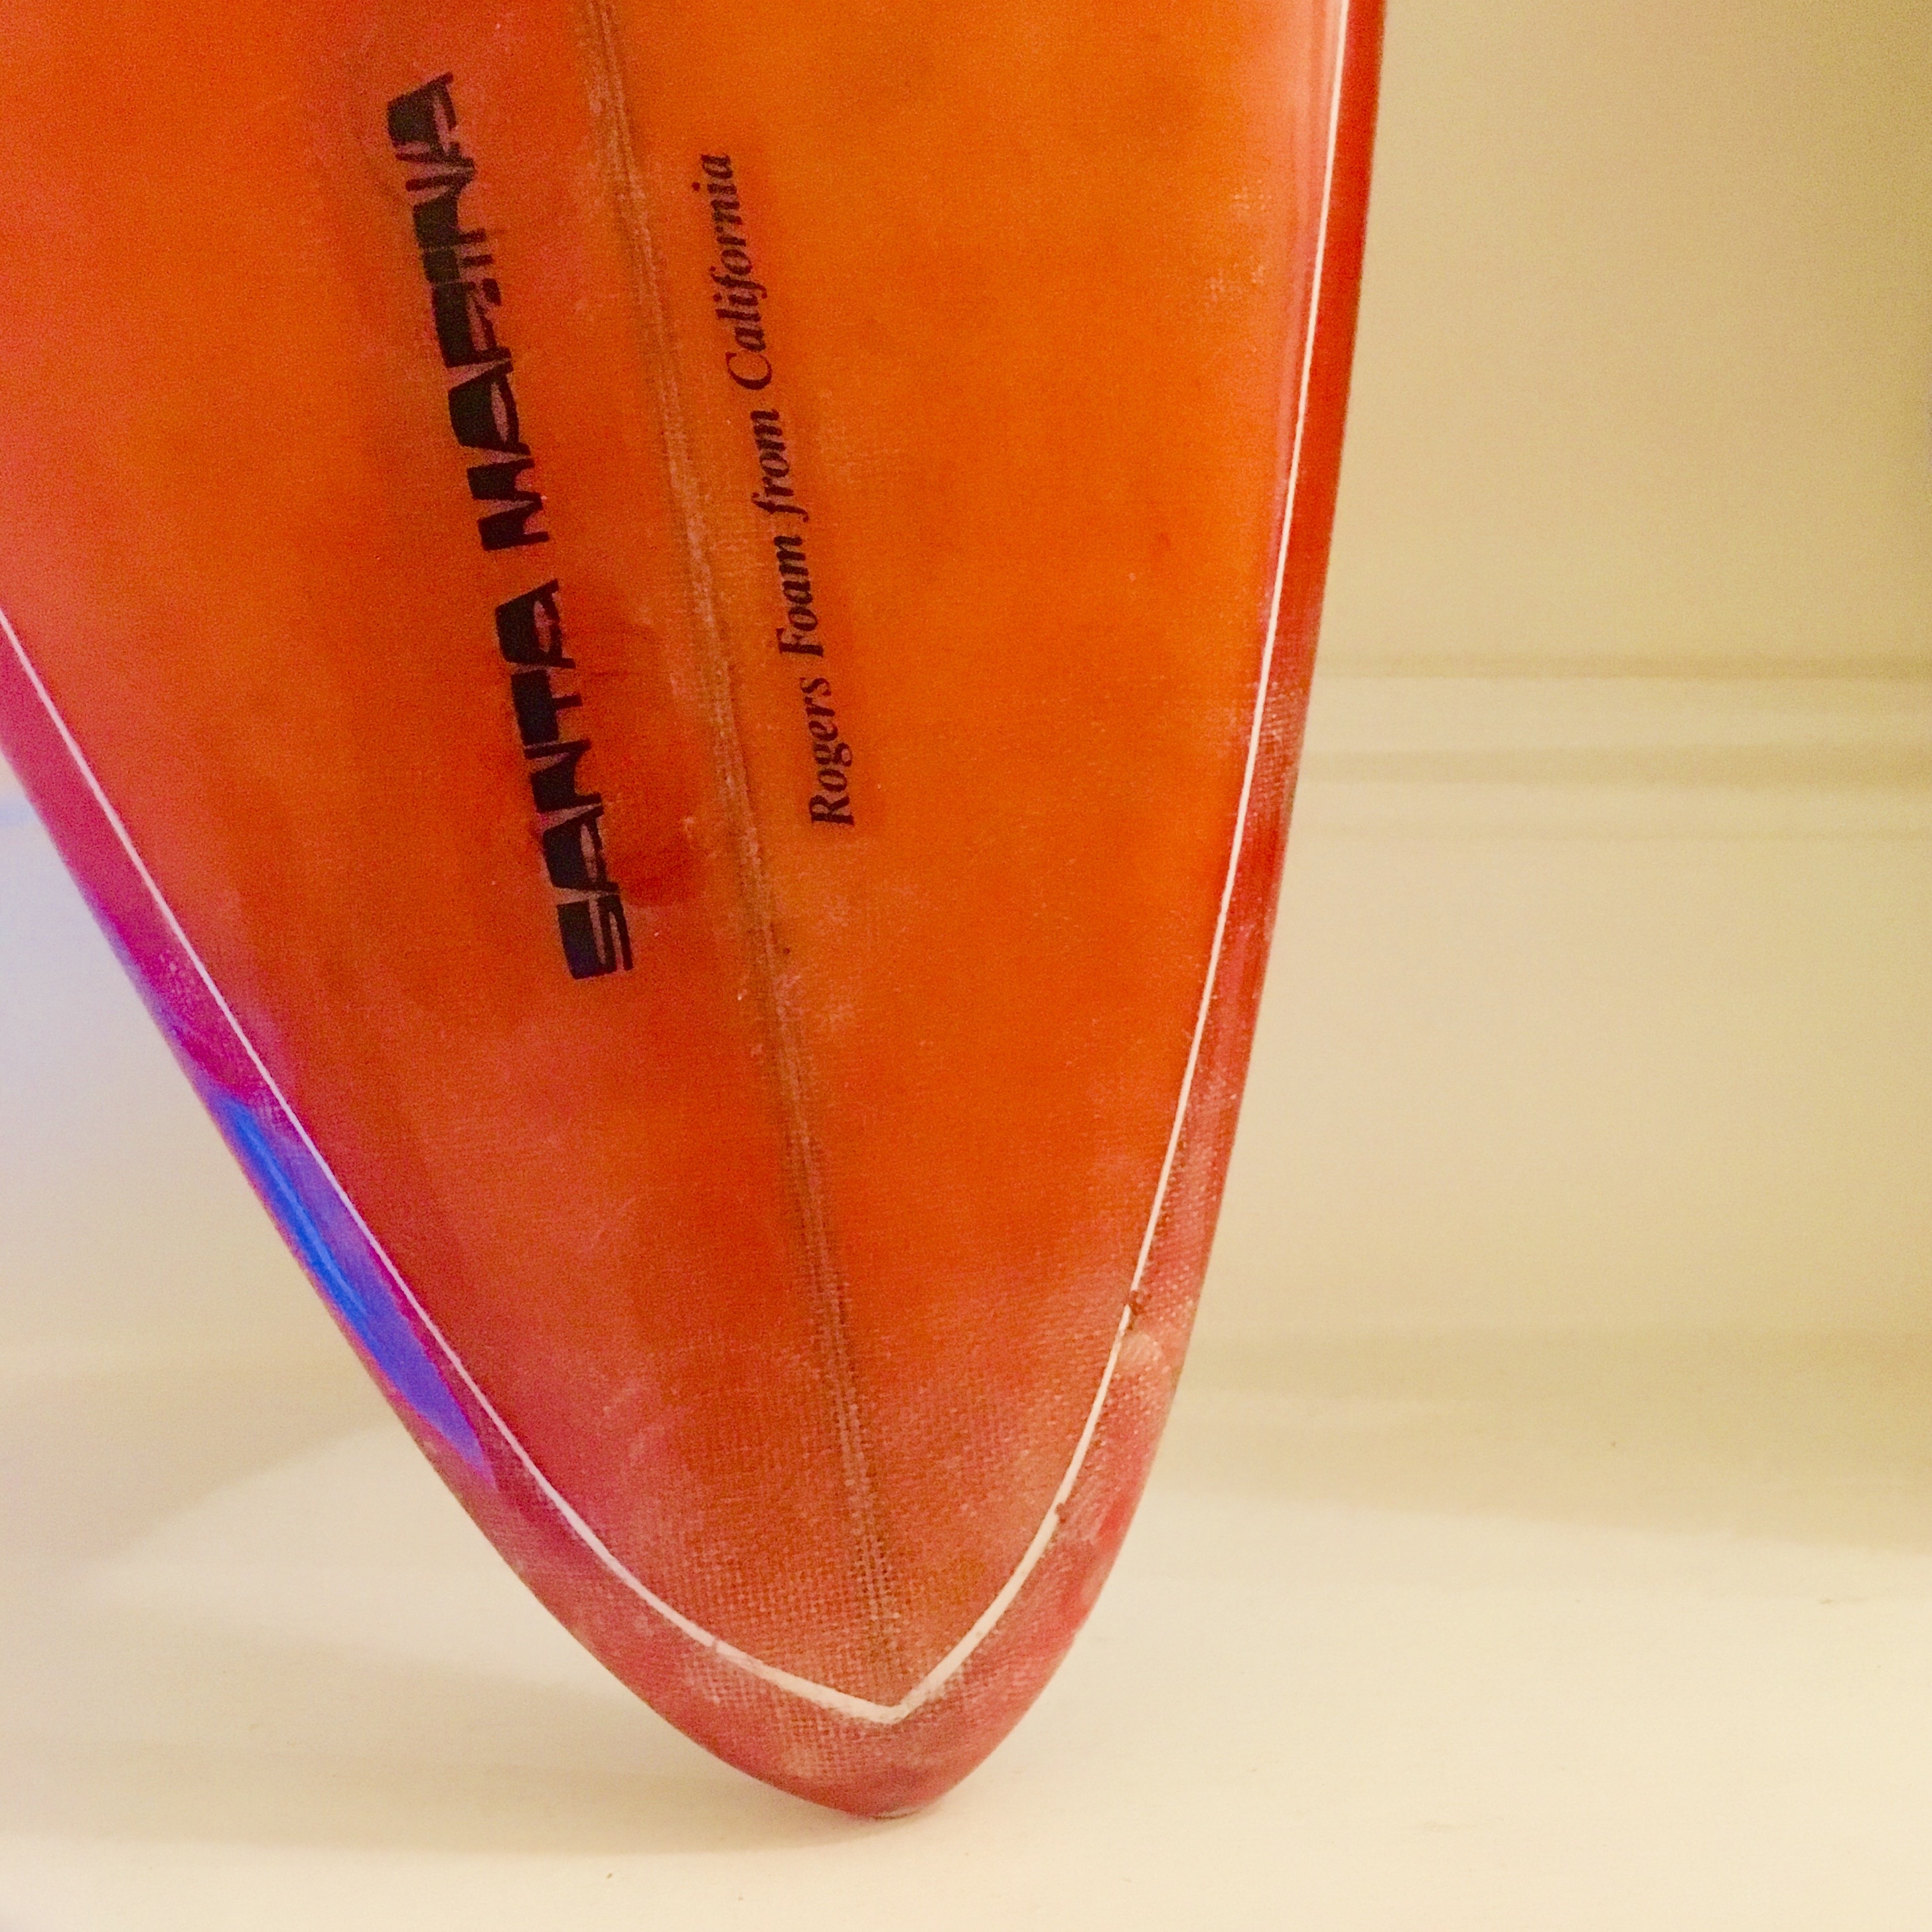 Vintage-Surfboard-Tail-XIV